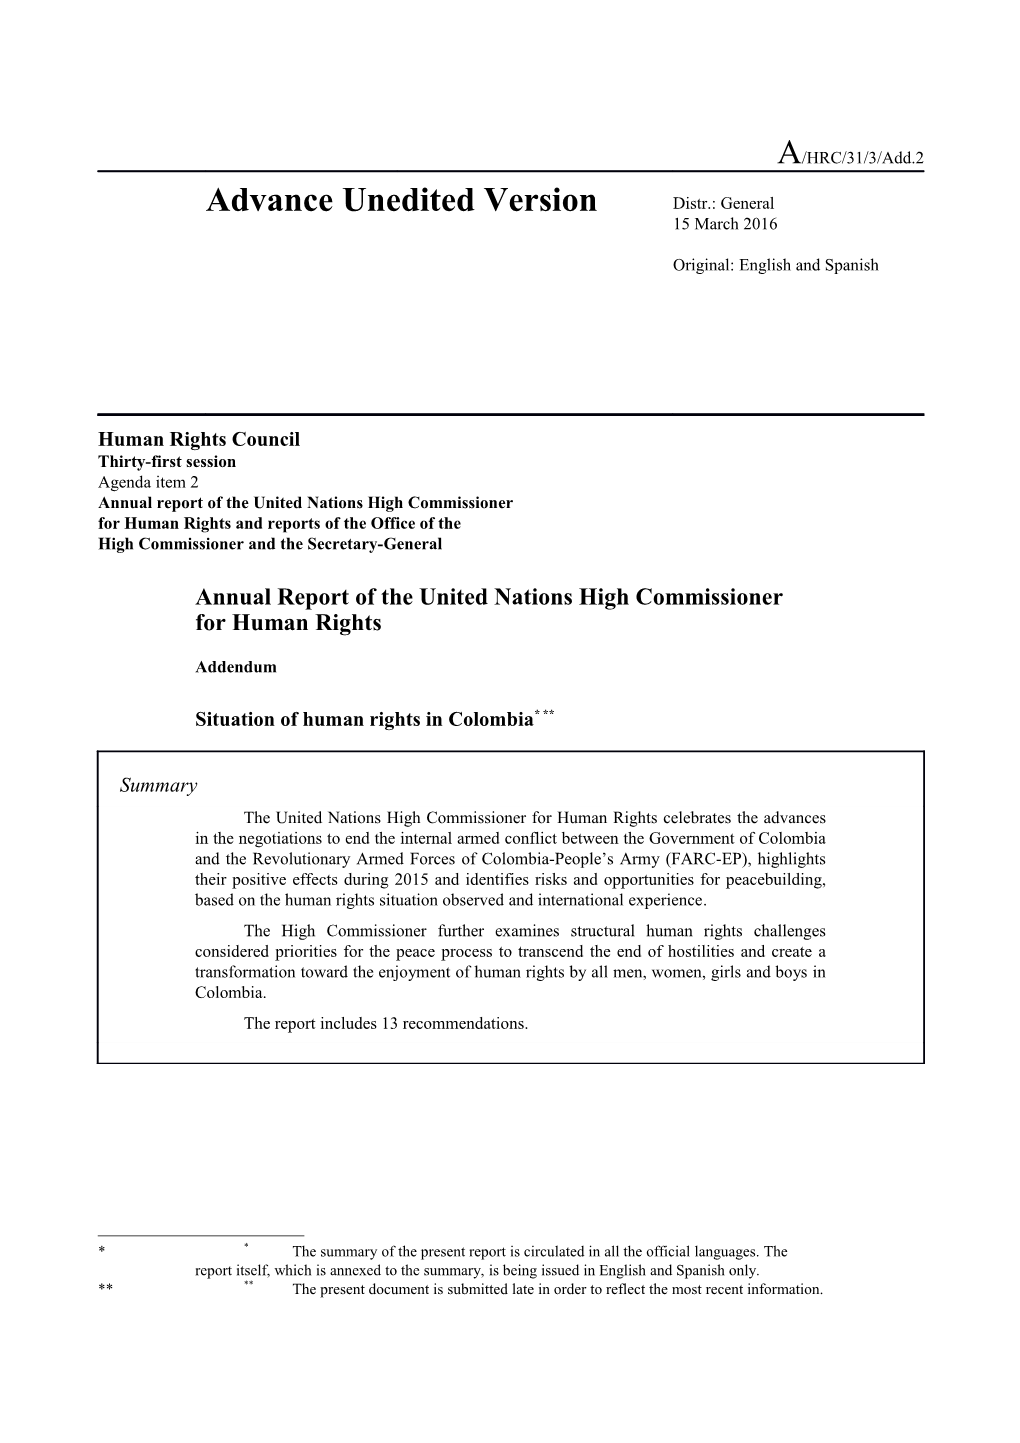 Addendum - Report of the United Nations High Commissioner for Human Rights on the Situation